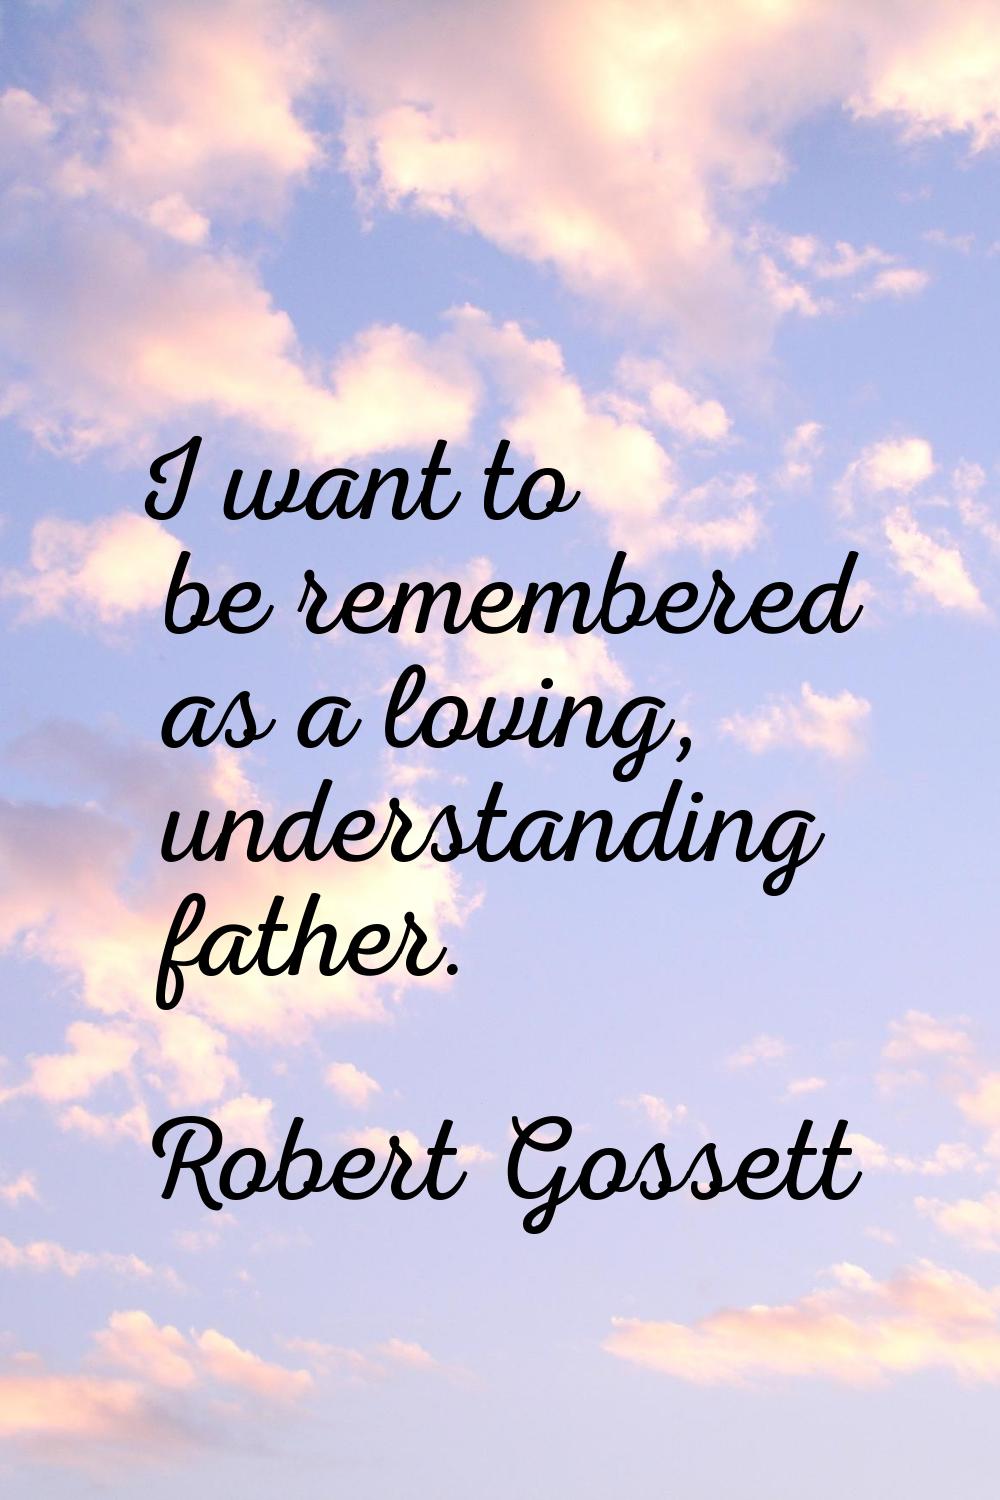 I want to be remembered as a loving, understanding father.